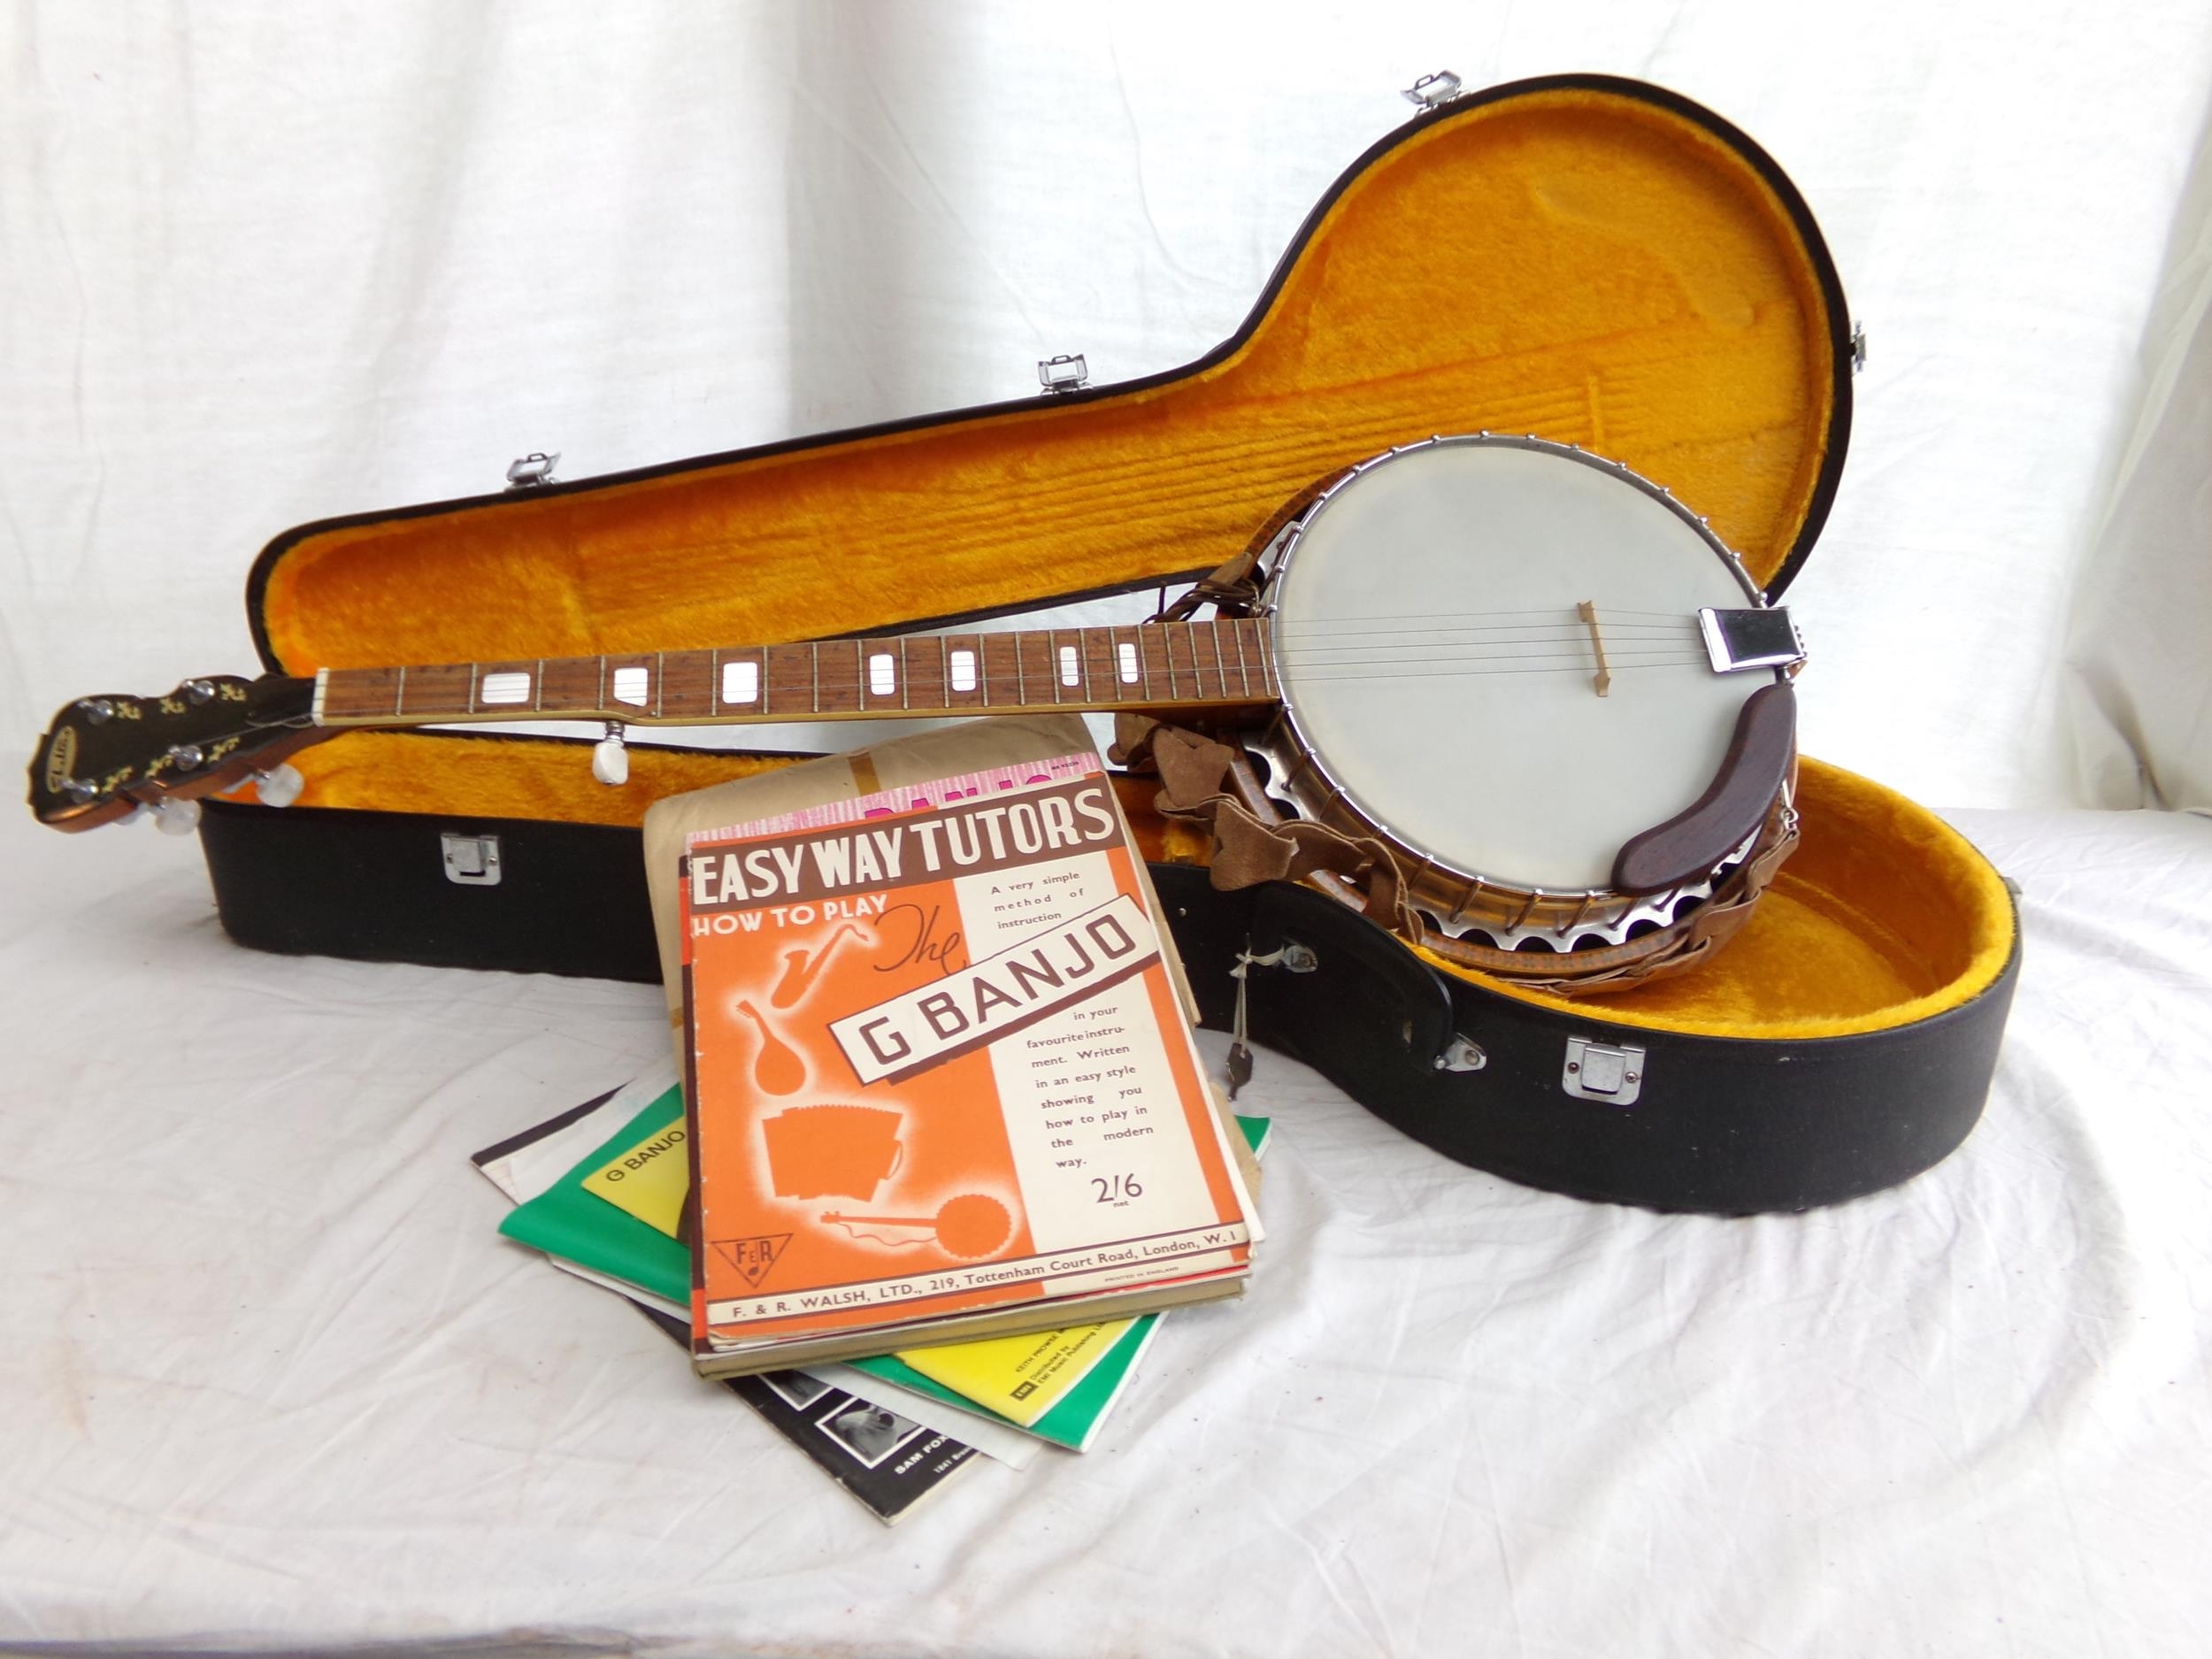 Shelton banjo in hard case, with a quantity of sheet music